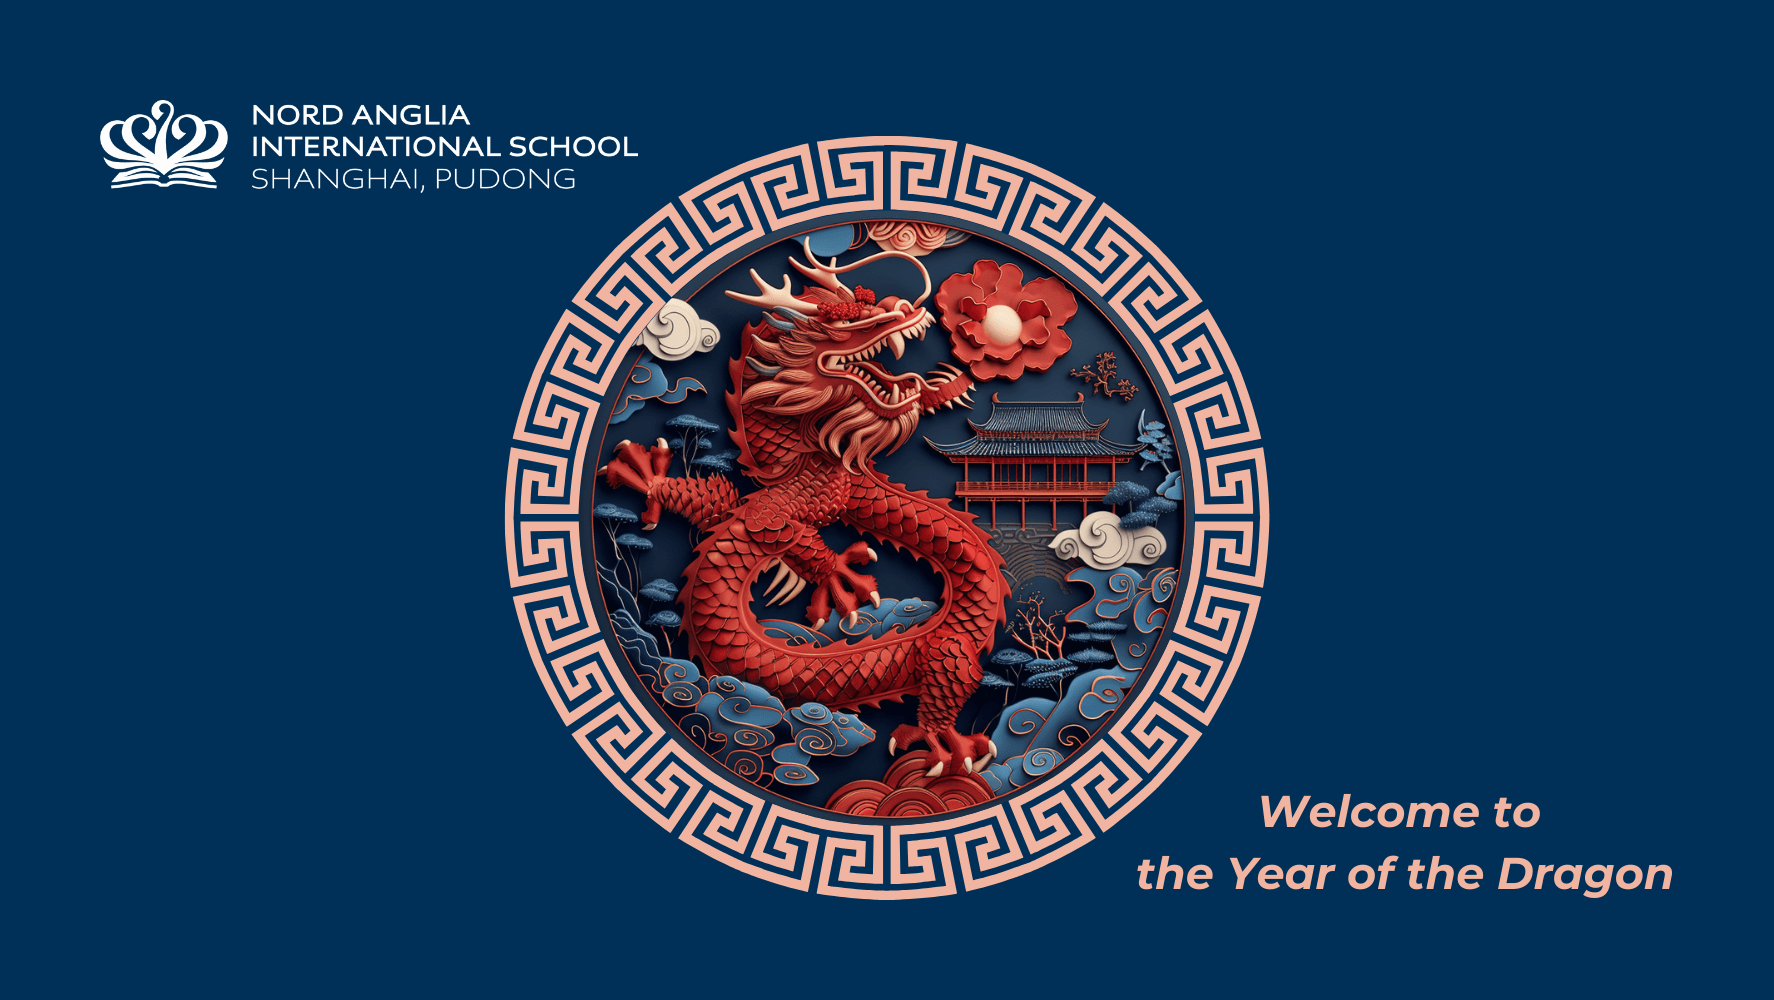 Welcome to the Year of the Dragon - Welcome to the Year of the Dragon